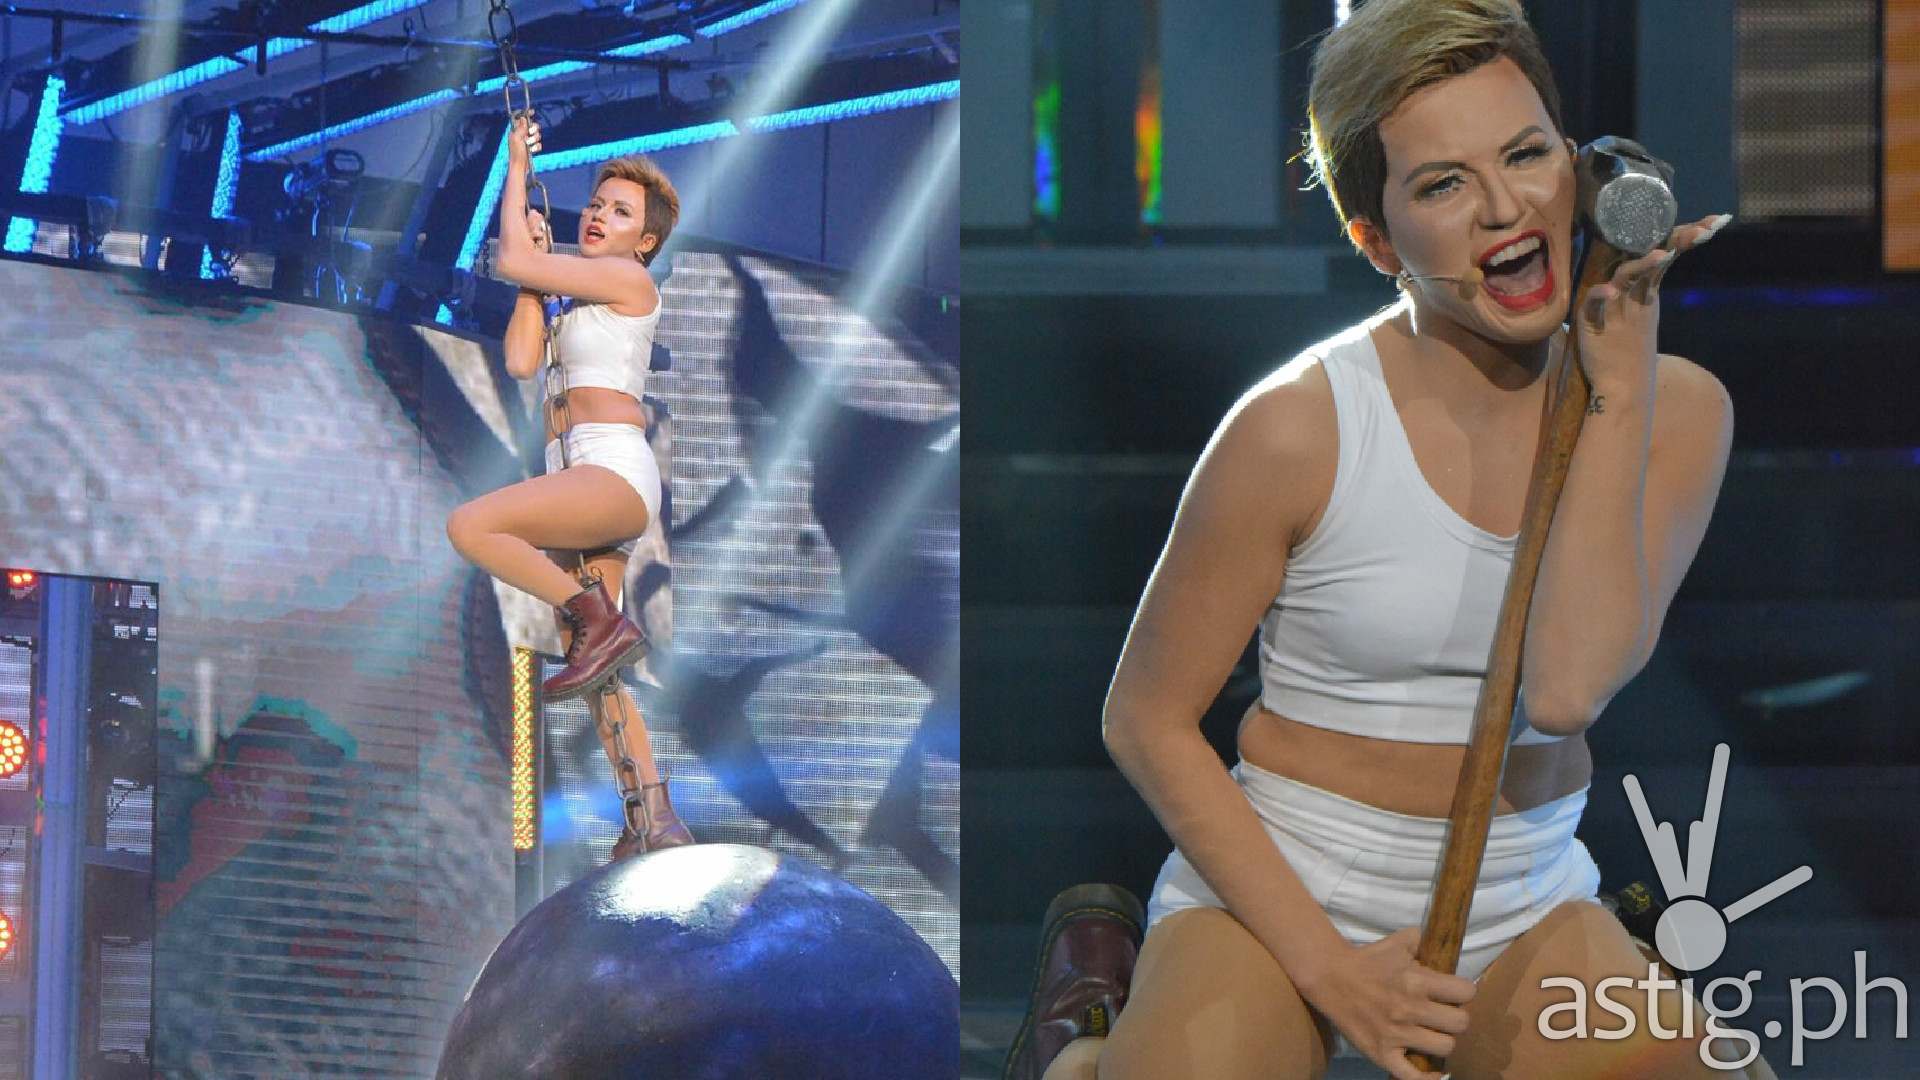 Melai Cantiveros performs as Miley Cyrus at Your Face Sounds Familiar's Grand Showdown